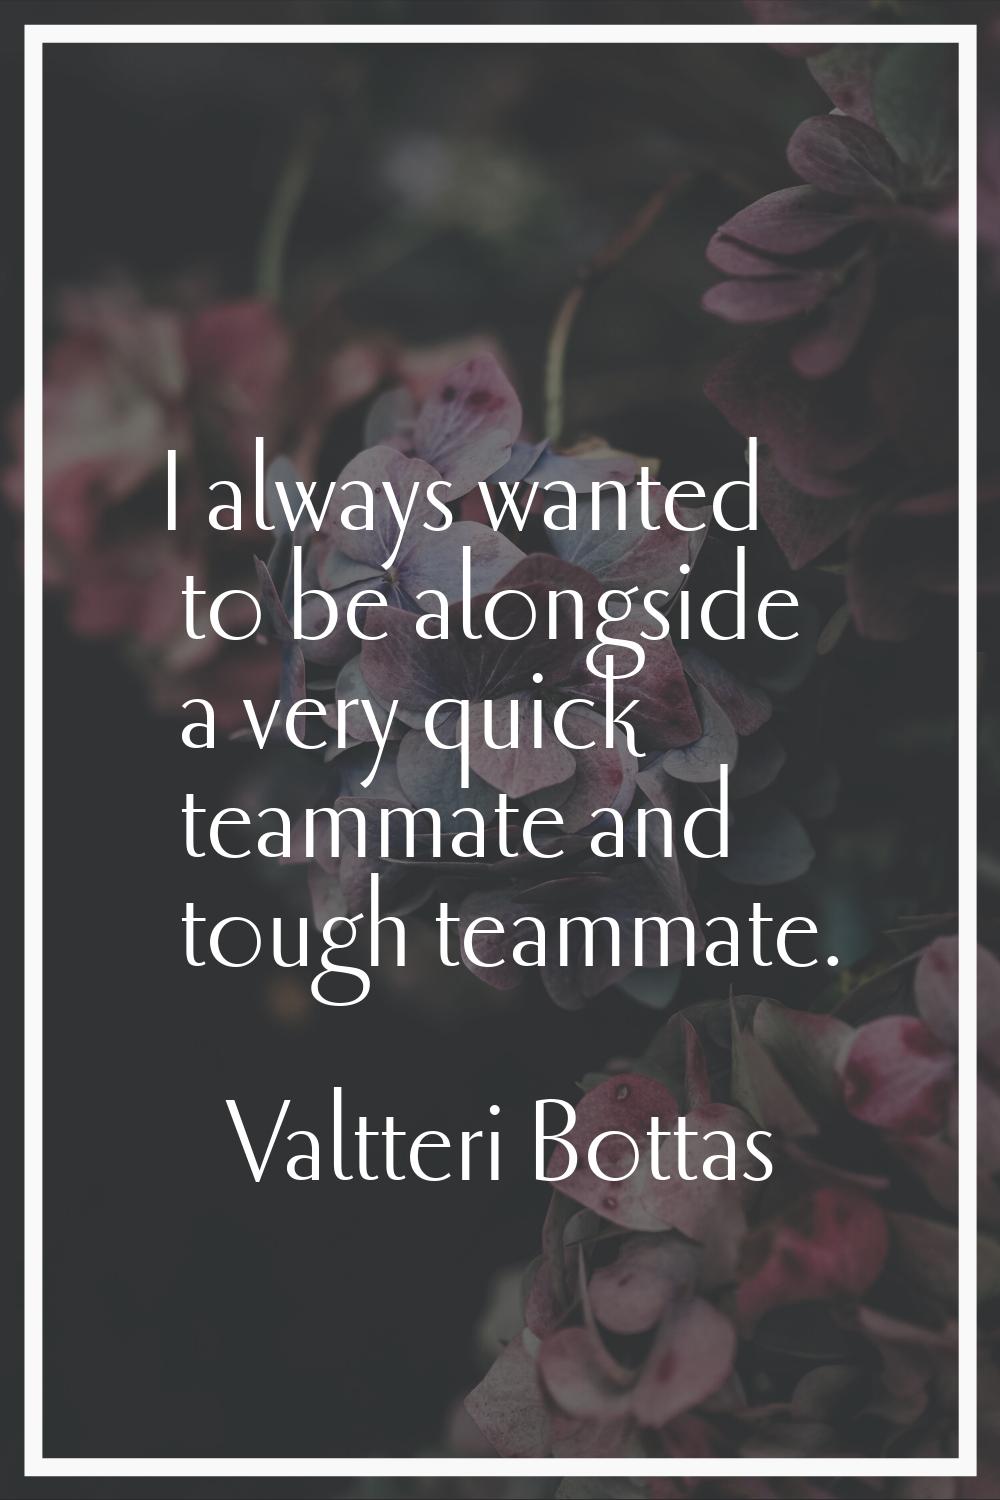 I always wanted to be alongside a very quick teammate and tough teammate.